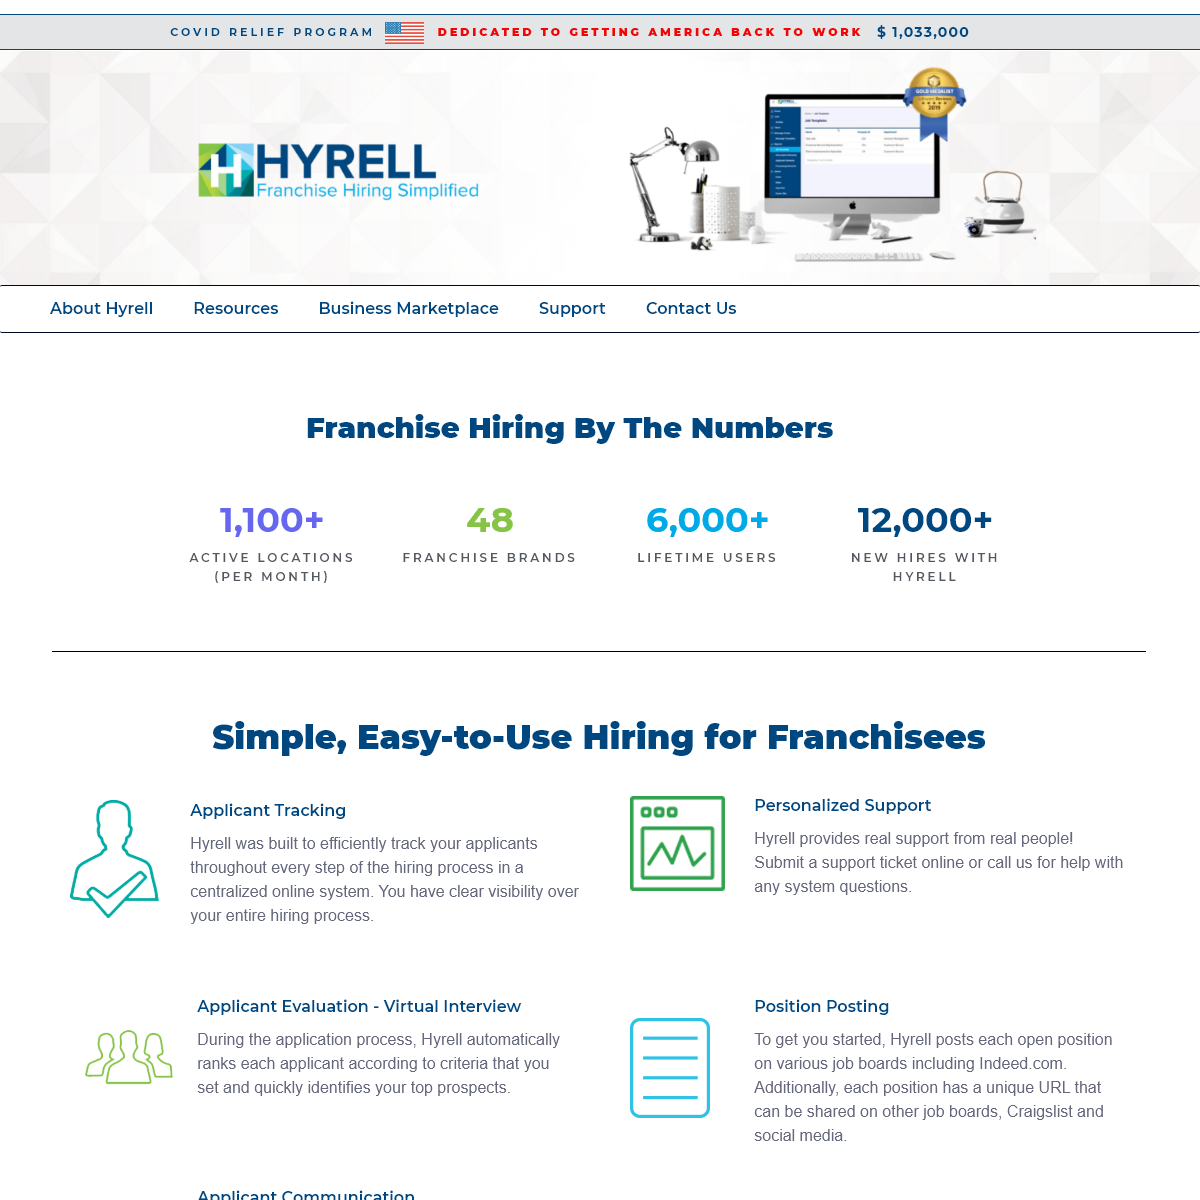 A complete backup of hyrell.com